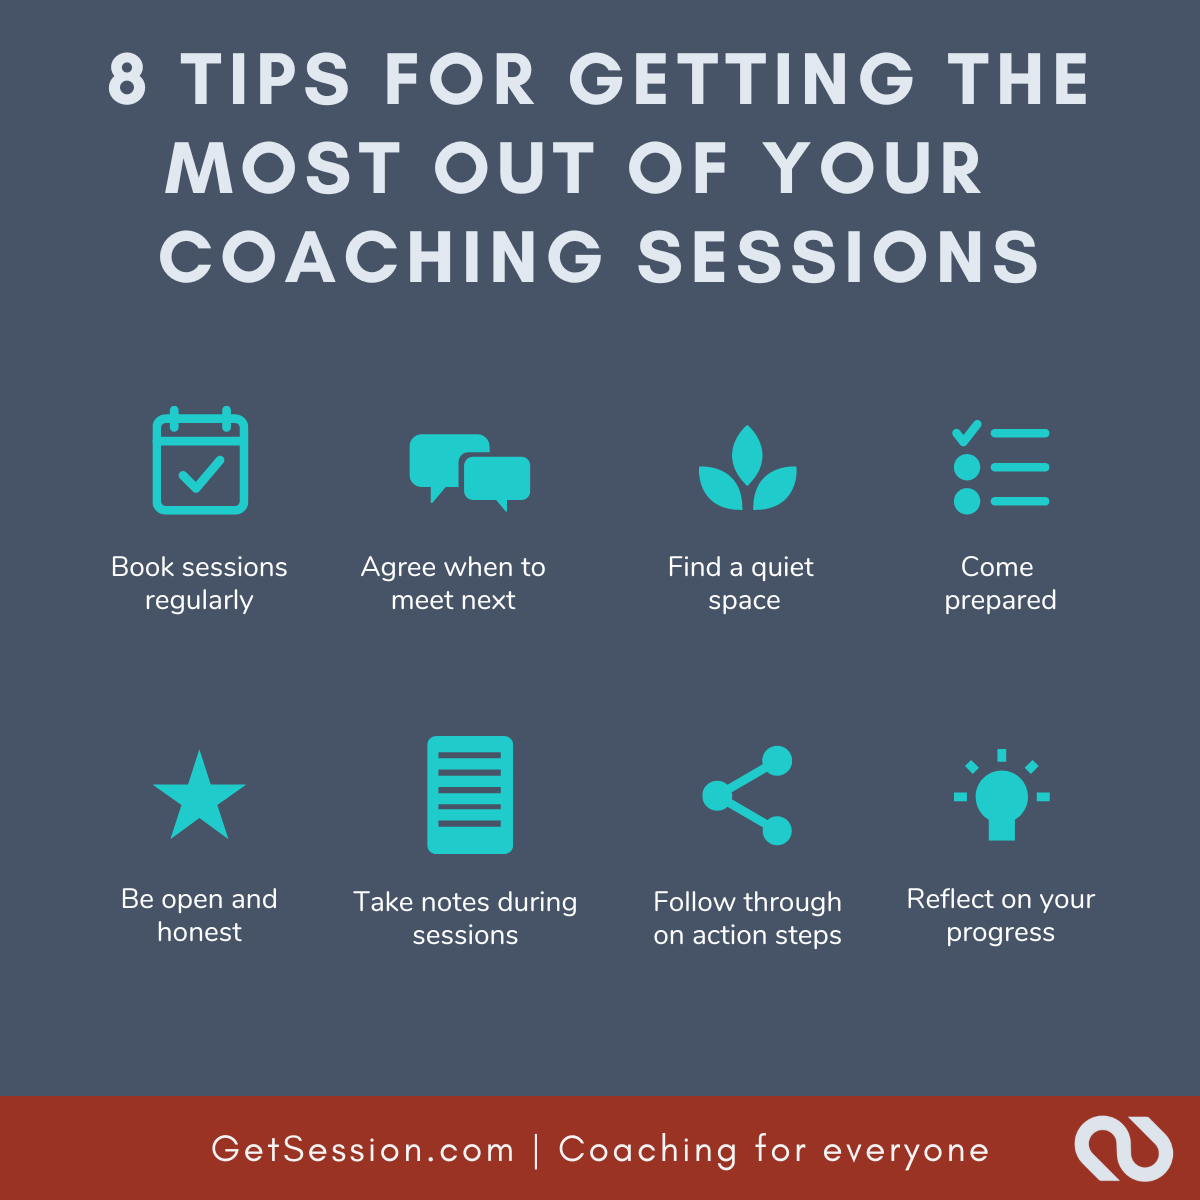 Image showing 8 tips for getting the most out of business coaching sessions